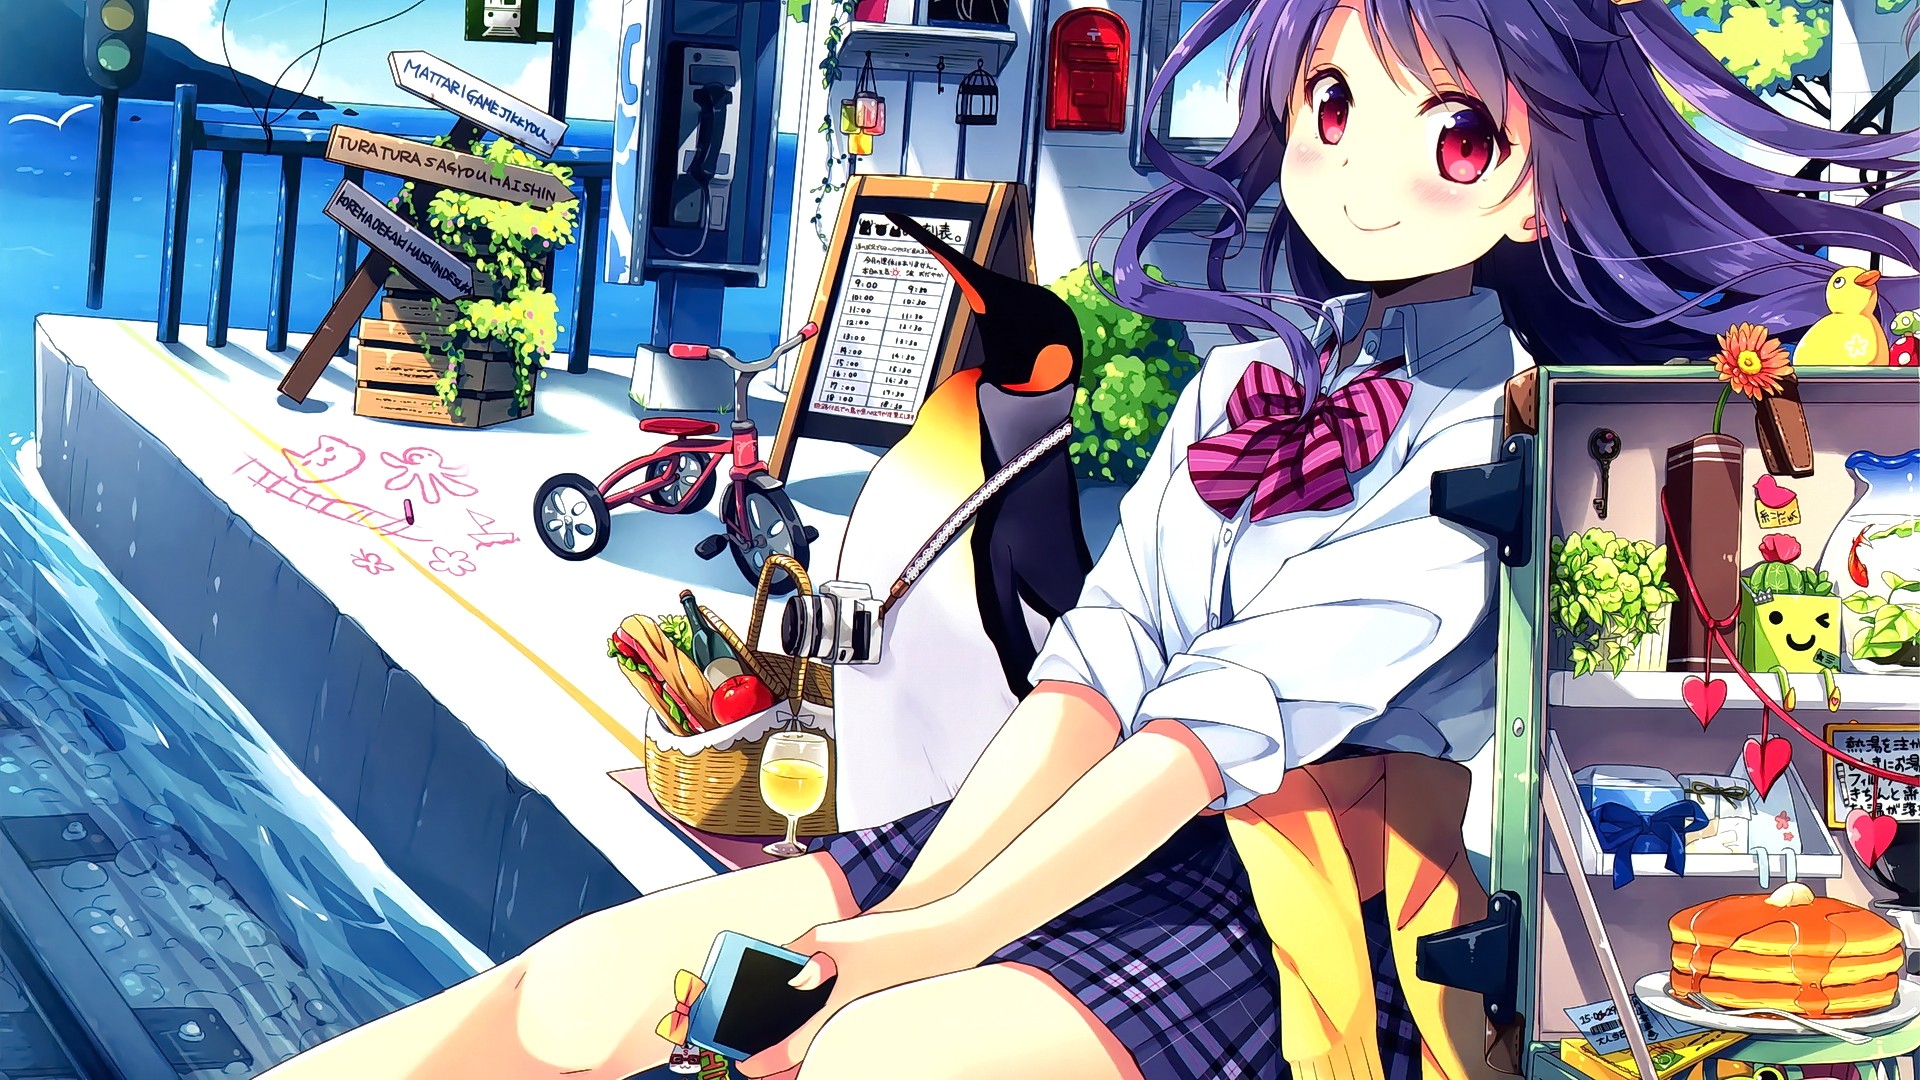 Anime 1920x1080 anime girls anime purple hair food red eyes Natsume Eri schedule smiling schoolgirl school uniform sitting water signs drawing pancakes bow tie penguins purple eyes blushing tricycle sandwiches baskets drink wind hair blowing in the wind camera phone